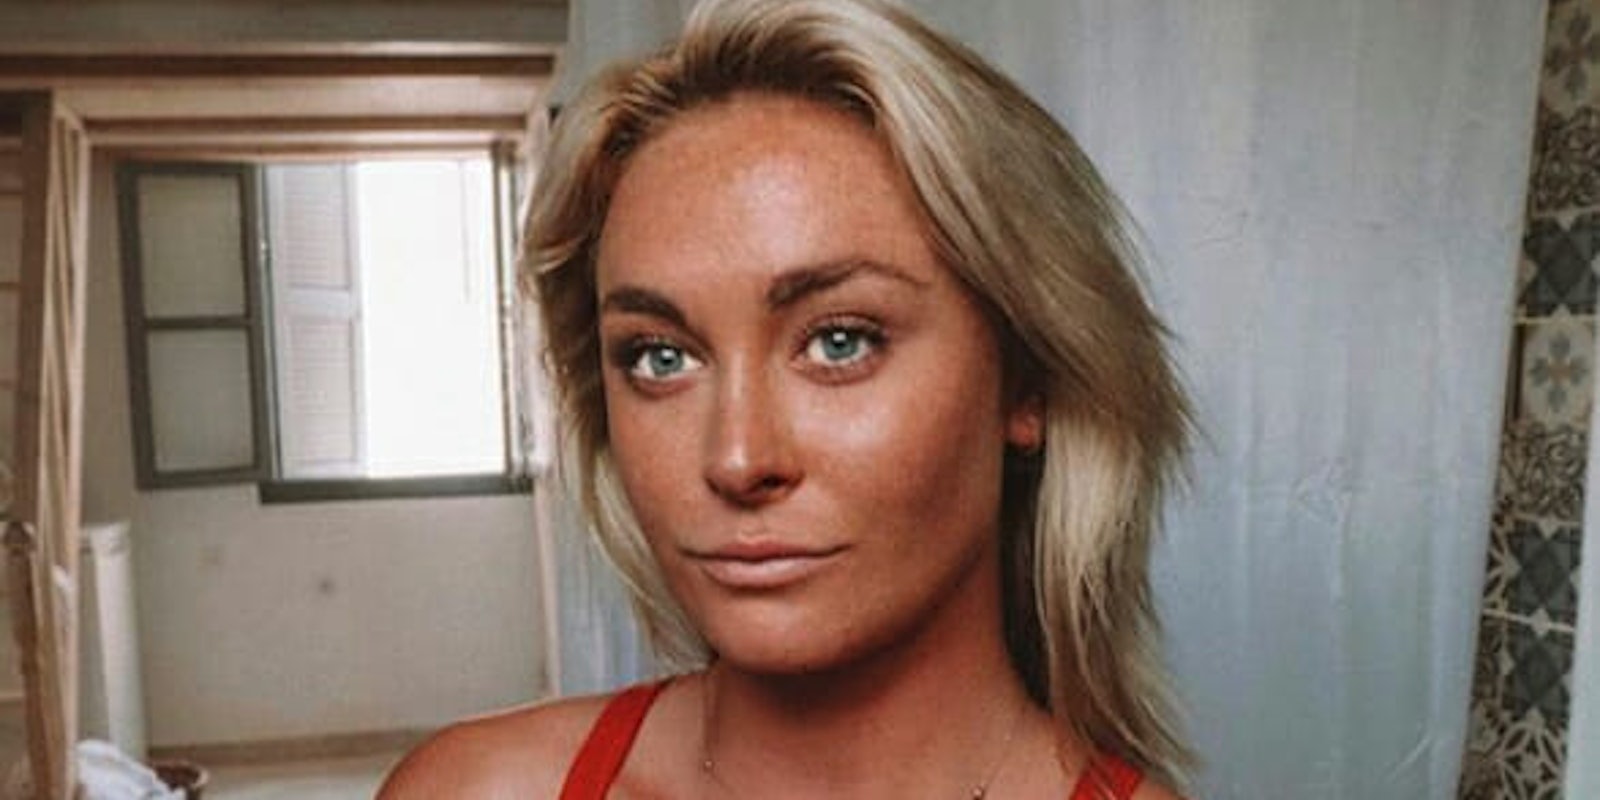 Instagram model Sinead McNamara reportedly died while working on a yacht in Greece.